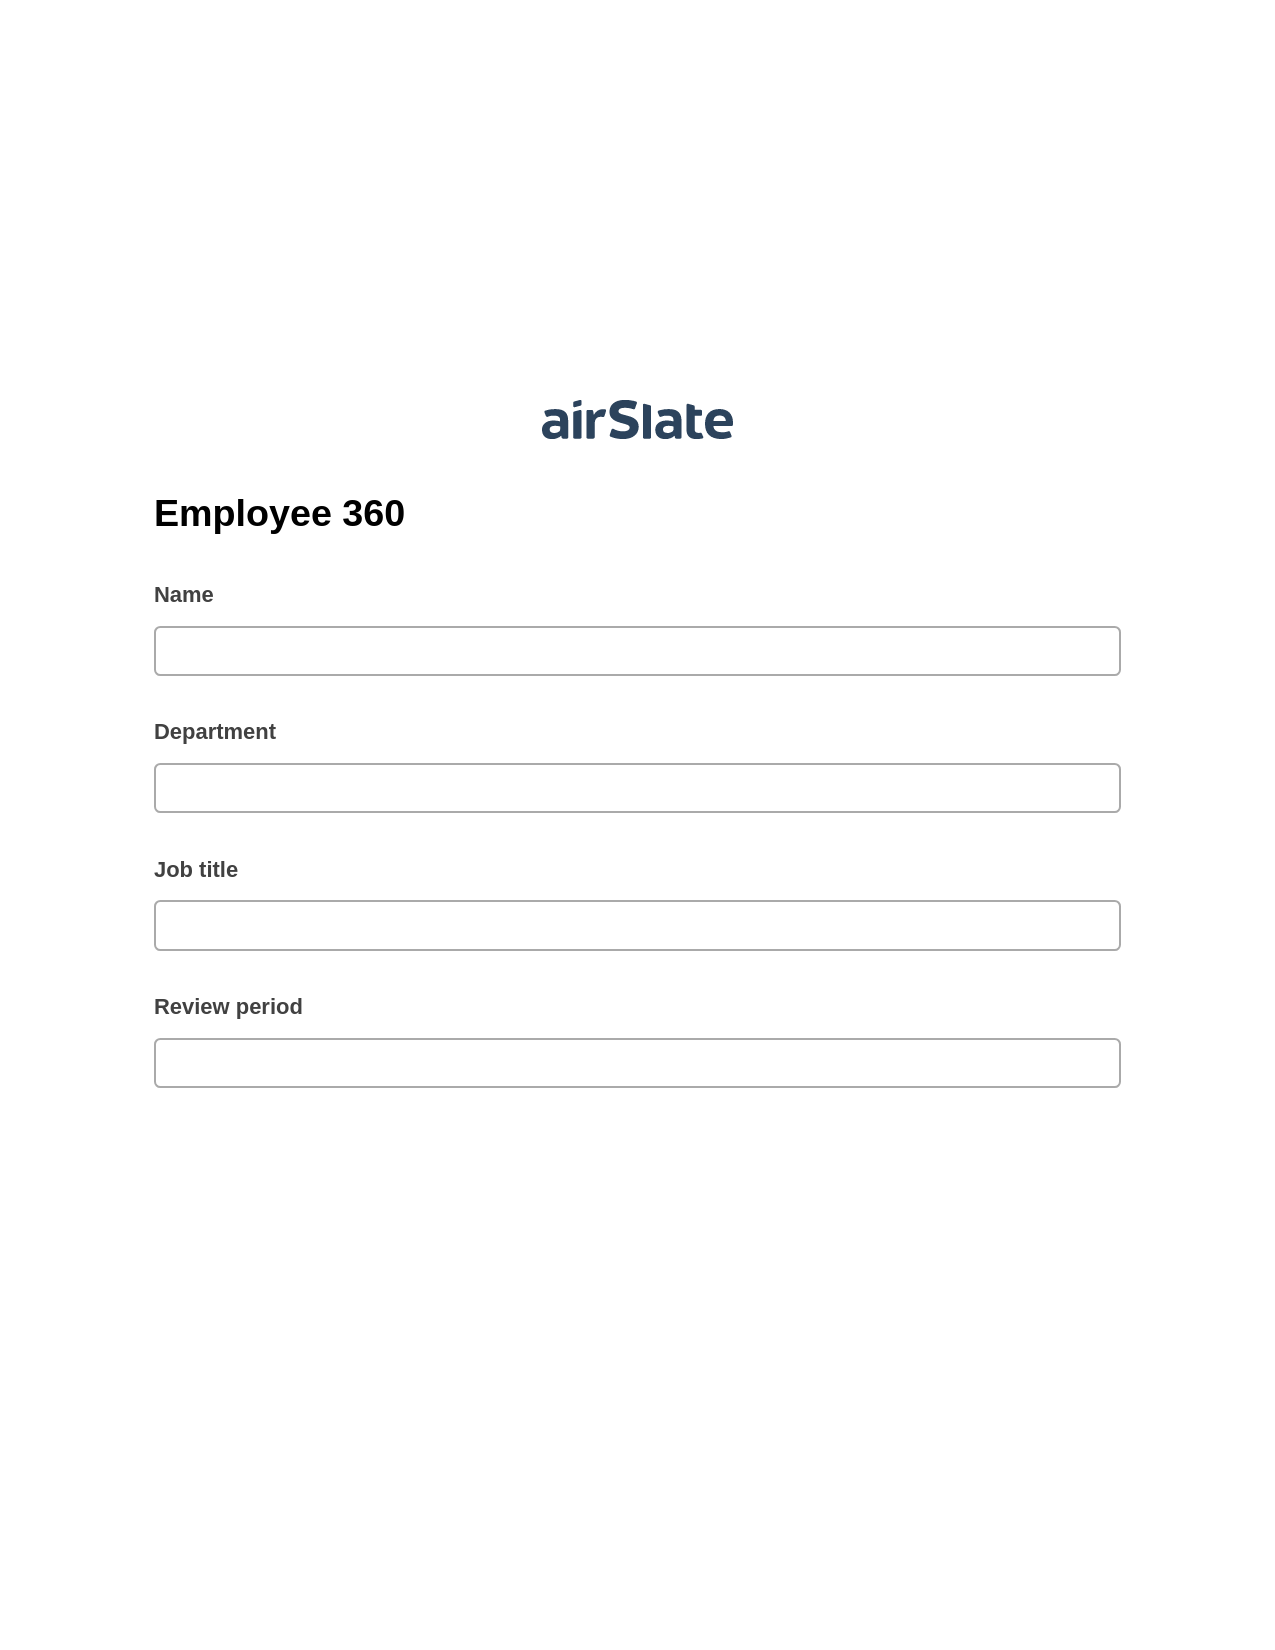 Employee 360 Pre-fill Dropdowns from CSV file Bot, Update NetSuite Record Bot, Export to Excel 365 Bot